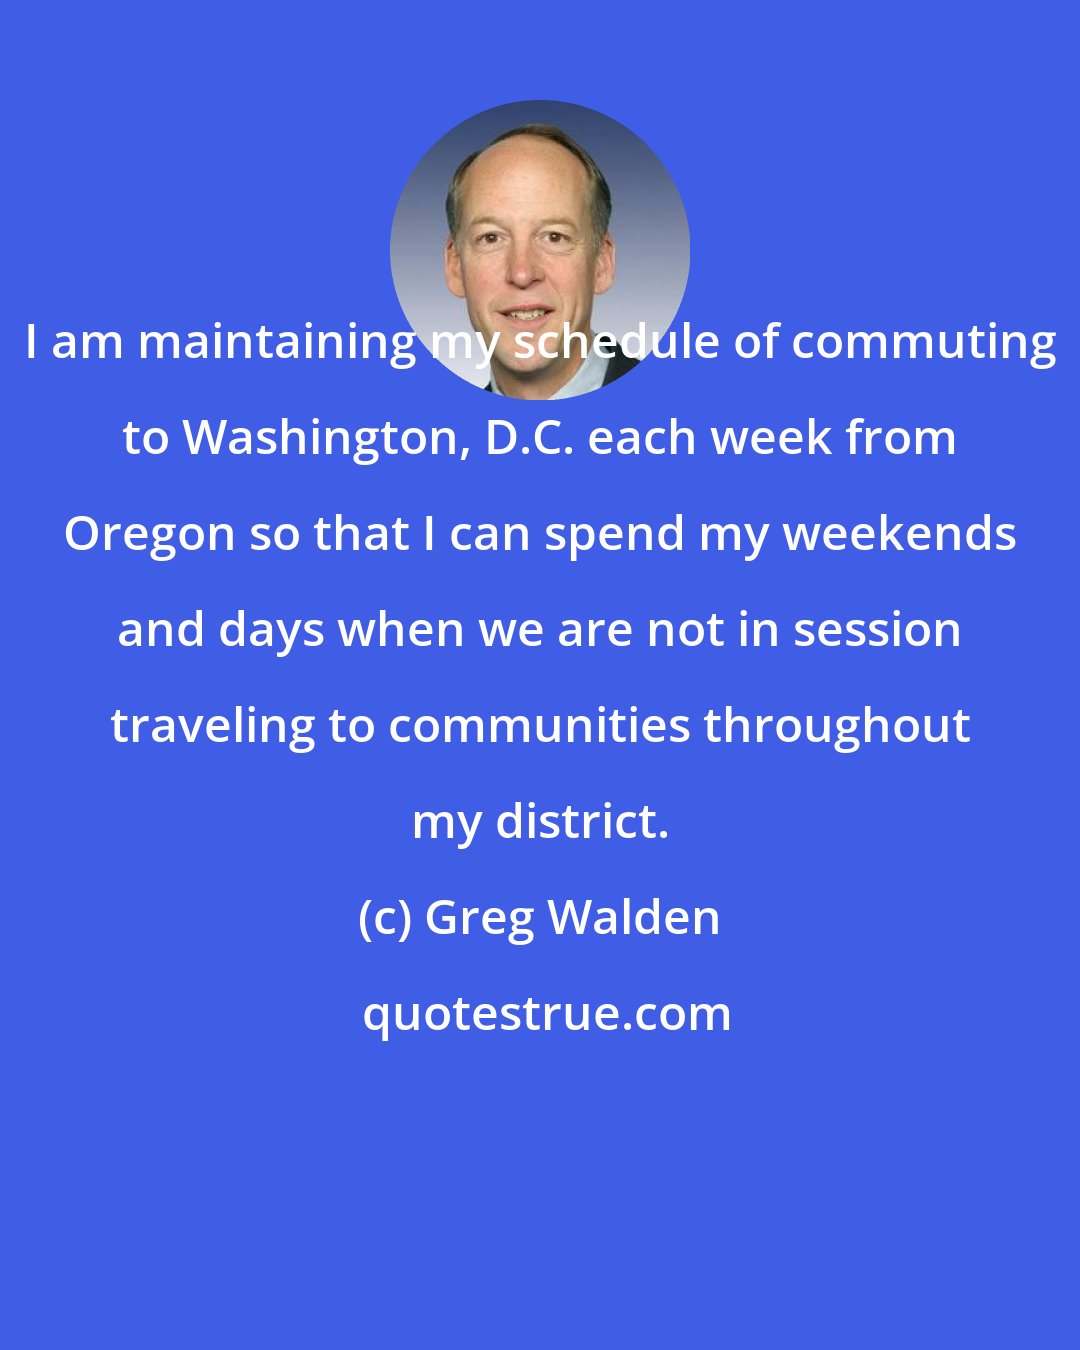 Greg Walden: I am maintaining my schedule of commuting to Washington, D.C. each week from Oregon so that I can spend my weekends and days when we are not in session traveling to communities throughout my district.